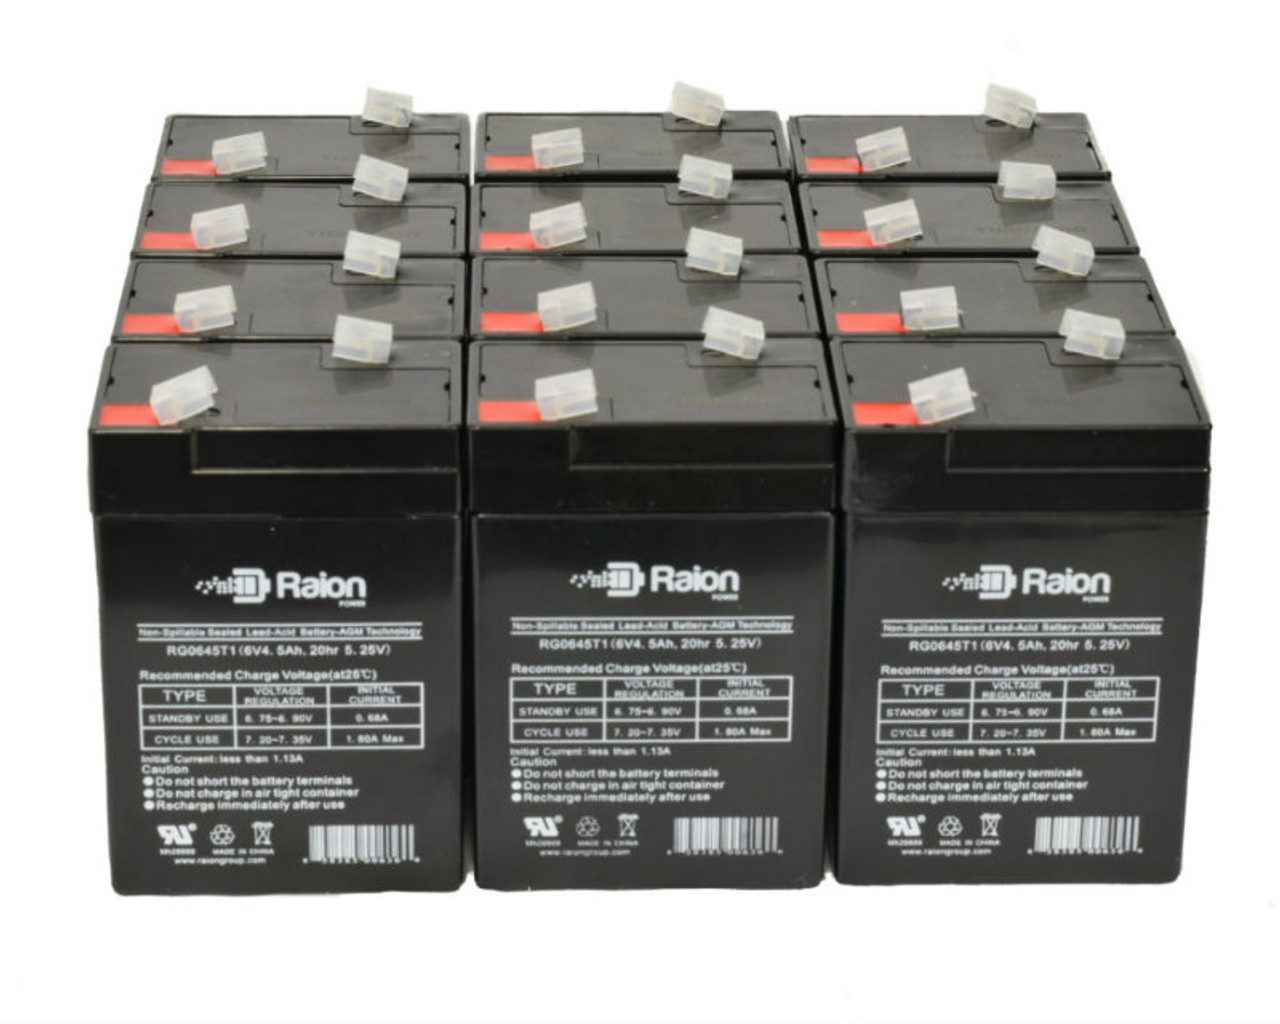 Raion Power 6V 4.5Ah Replacement Emergency Light Battery for Sure-Lites VP12 - 12 Pack